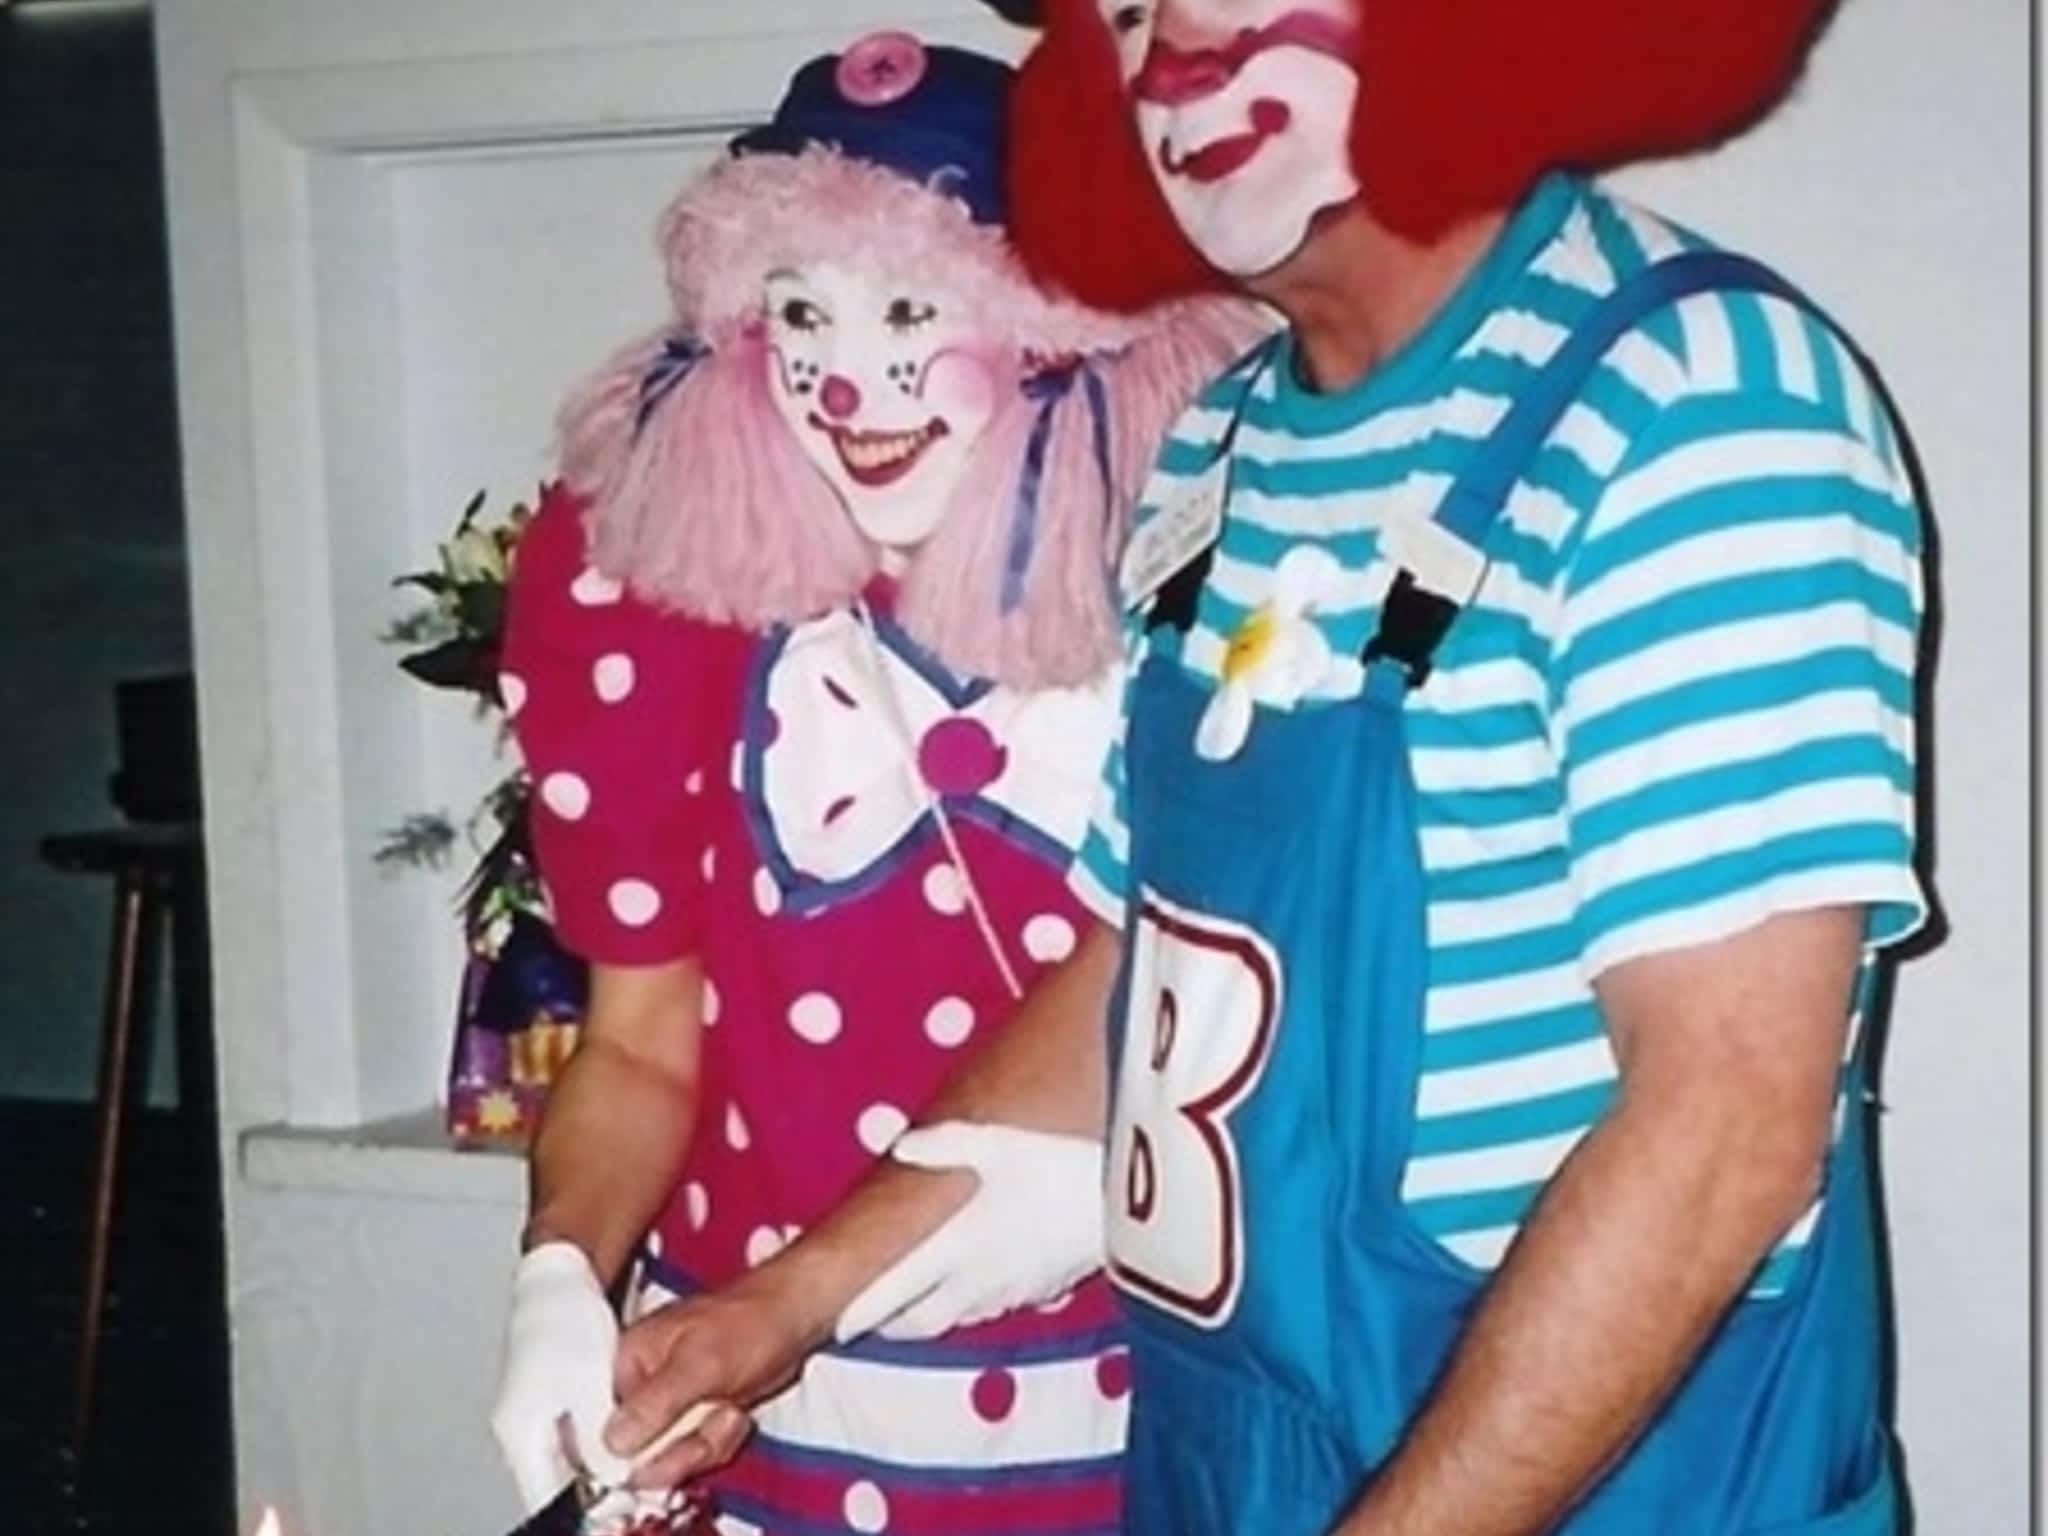 photo A Couple Of Real Clowns Buddy Or Button